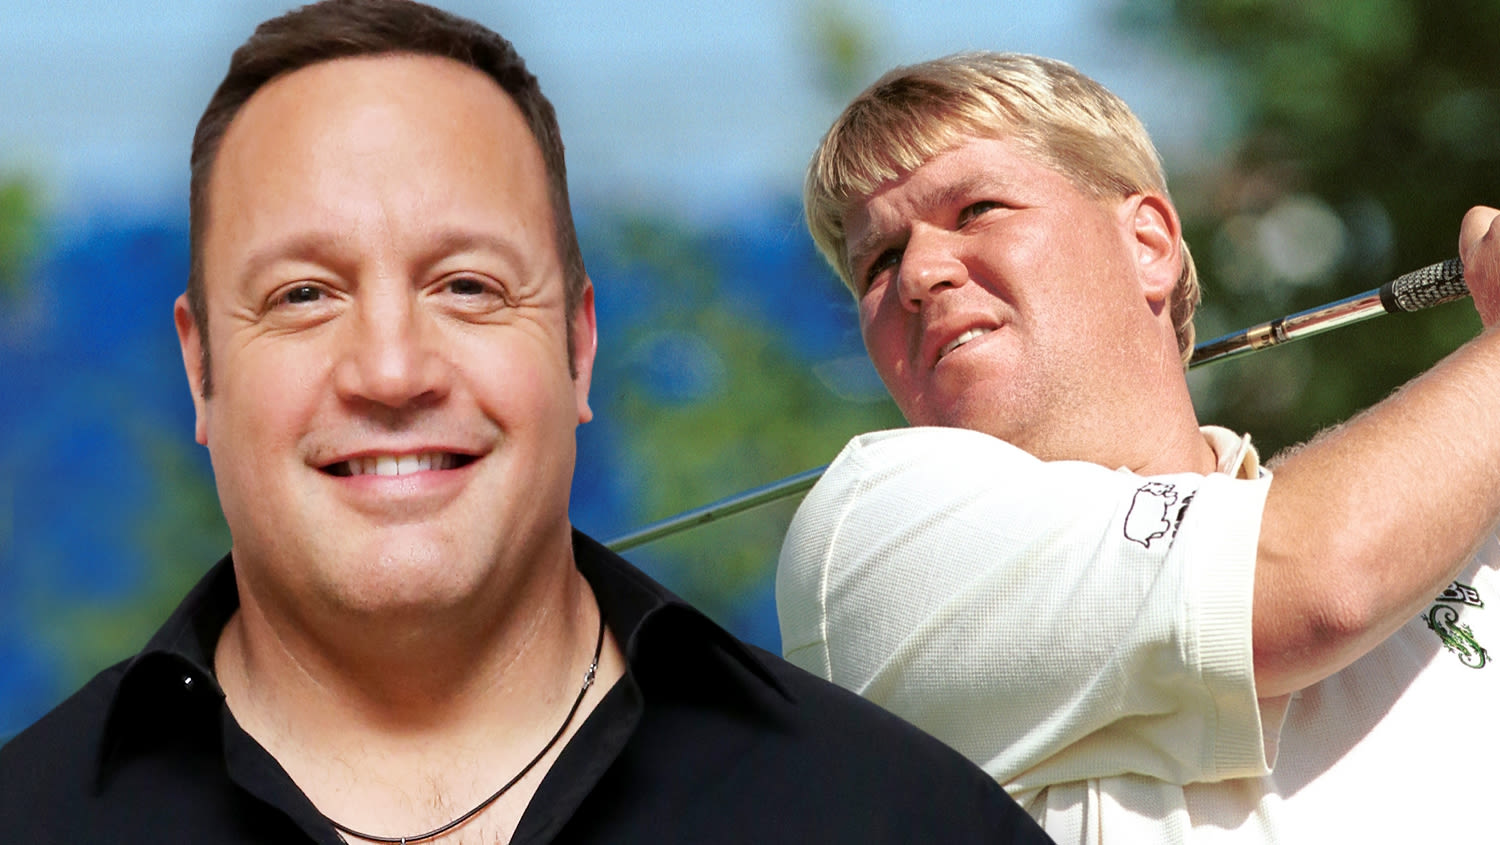 John Daly Limited Series In Works From Village Roadshow With Kevin James Tapped To Play Iconic Golfer